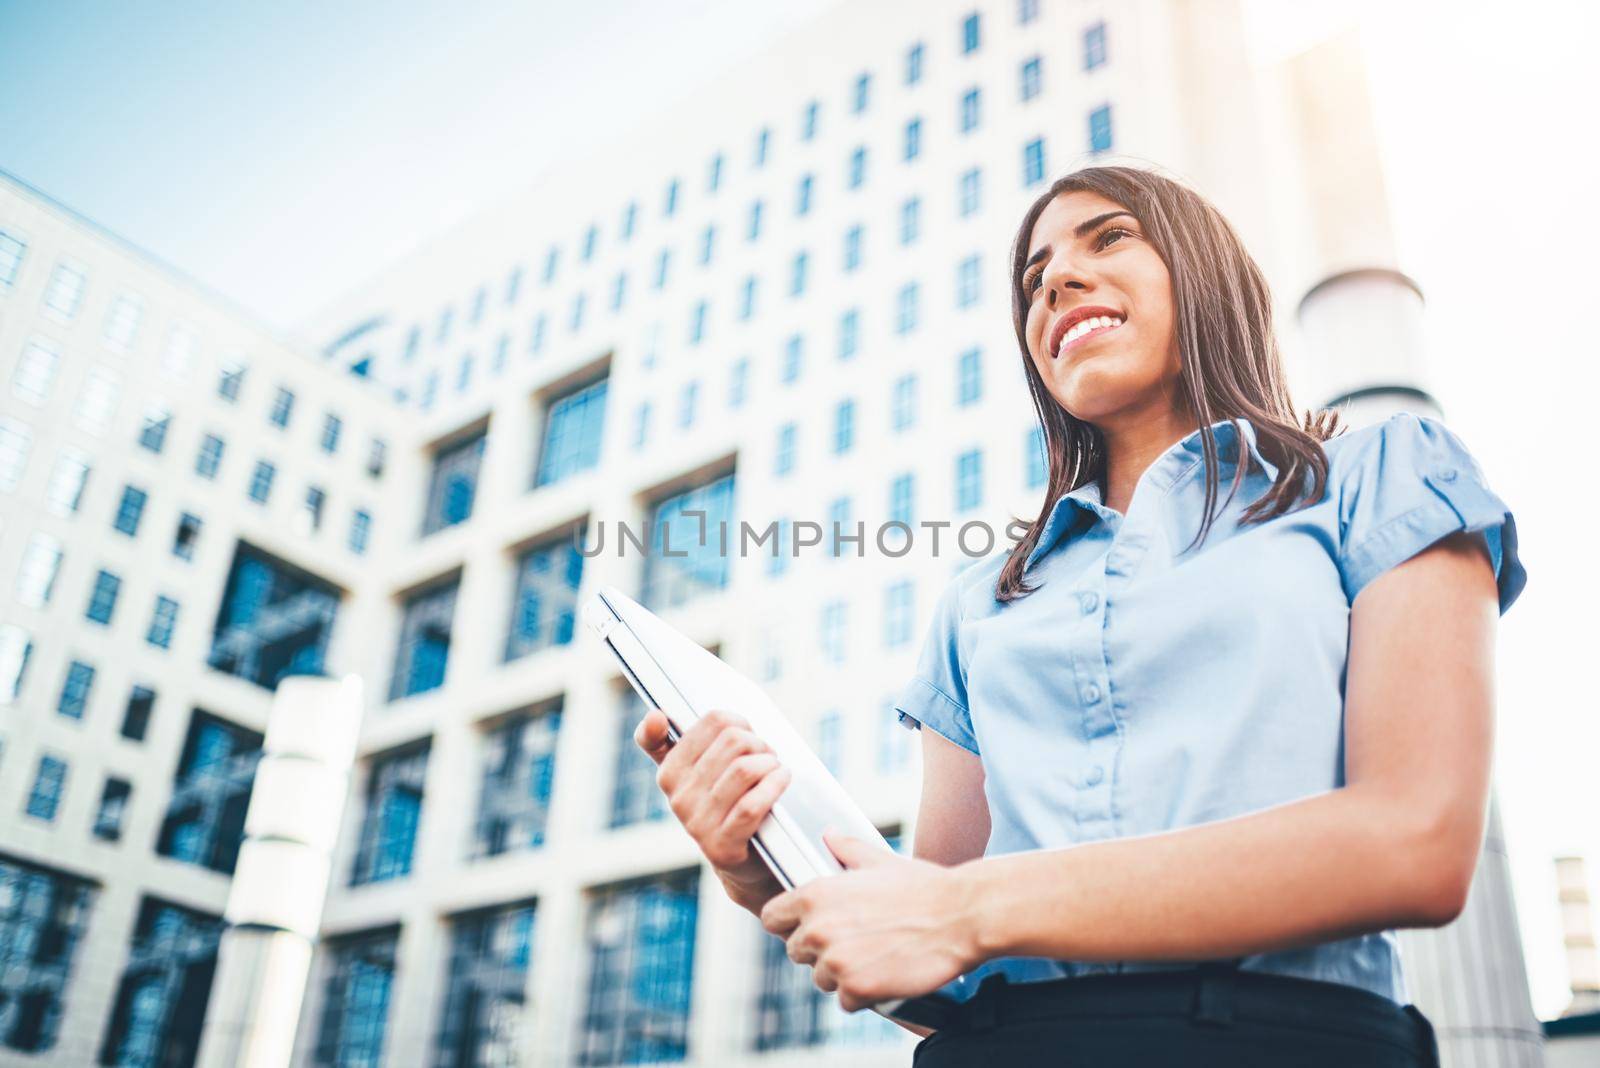 Emotional portrait of a happy and beautiful young businesswoman who carries a laptop on the background of a business center.